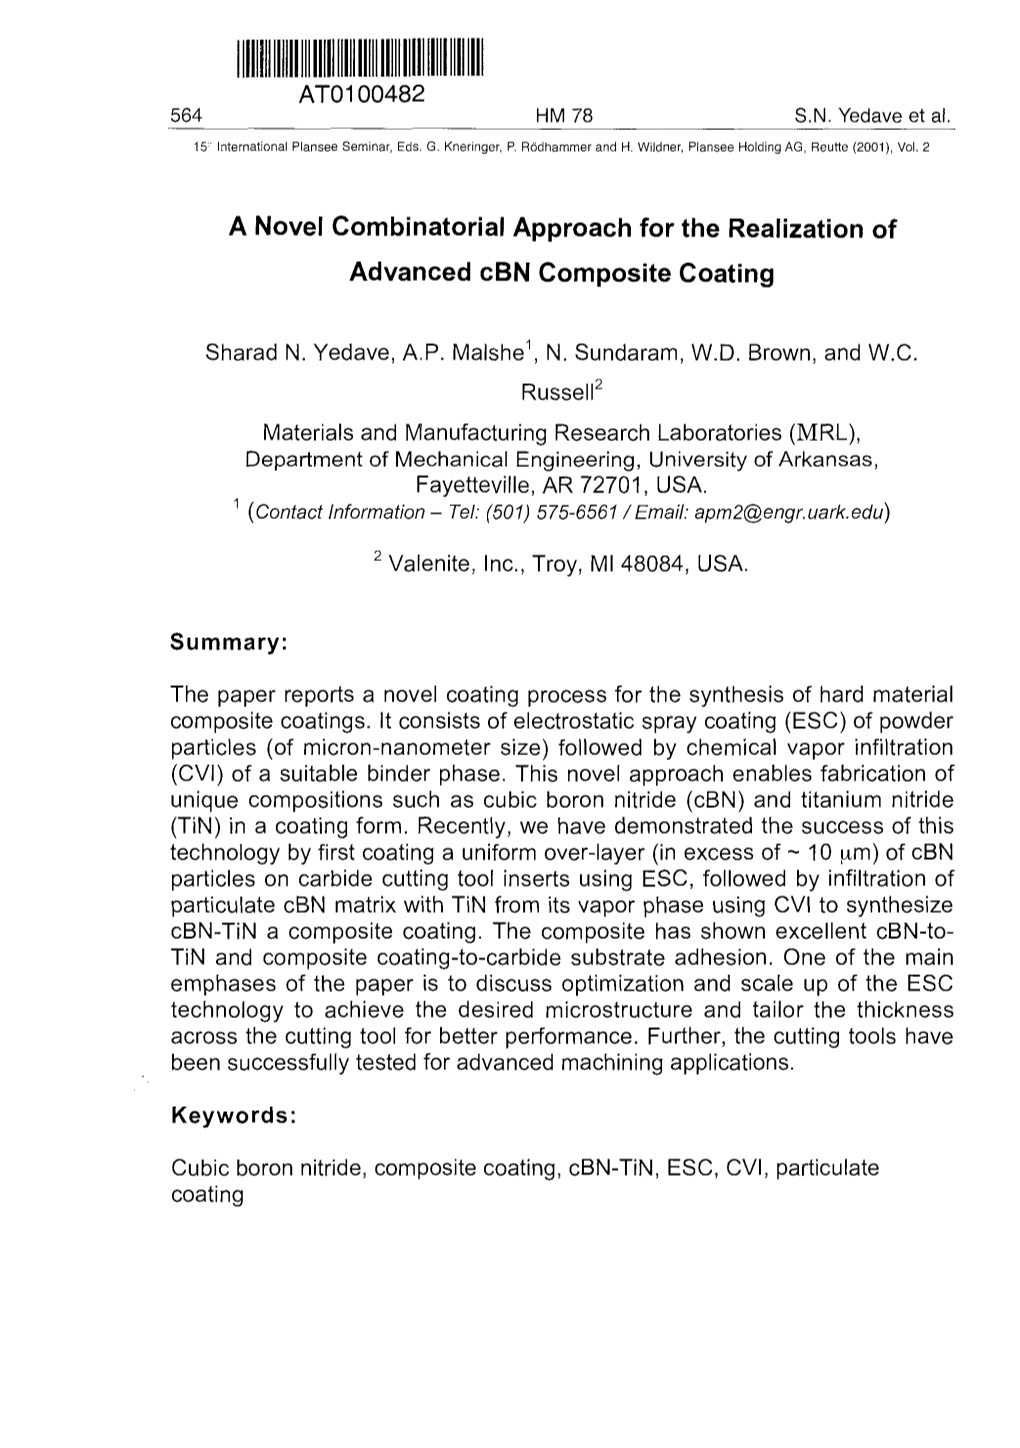 A Novel Combinatorial Approach for the Realization of Advanced Cbn Composite Coating